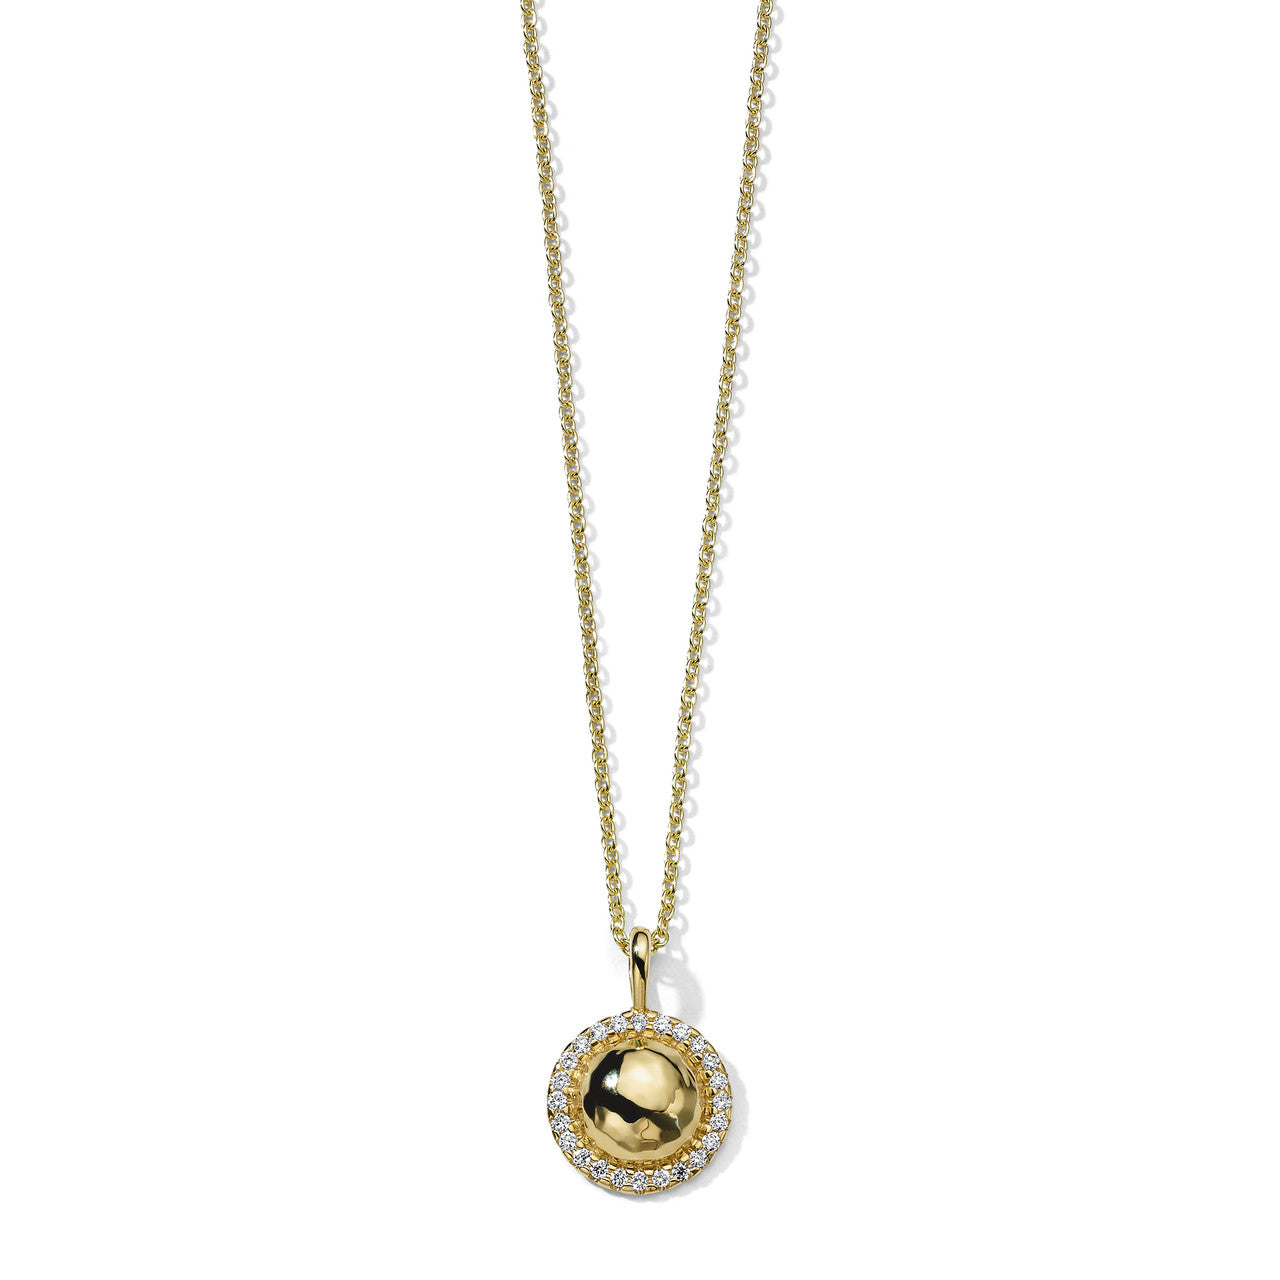 Stardust Goddess Teeny Hammered Dome Necklace with Diamonds